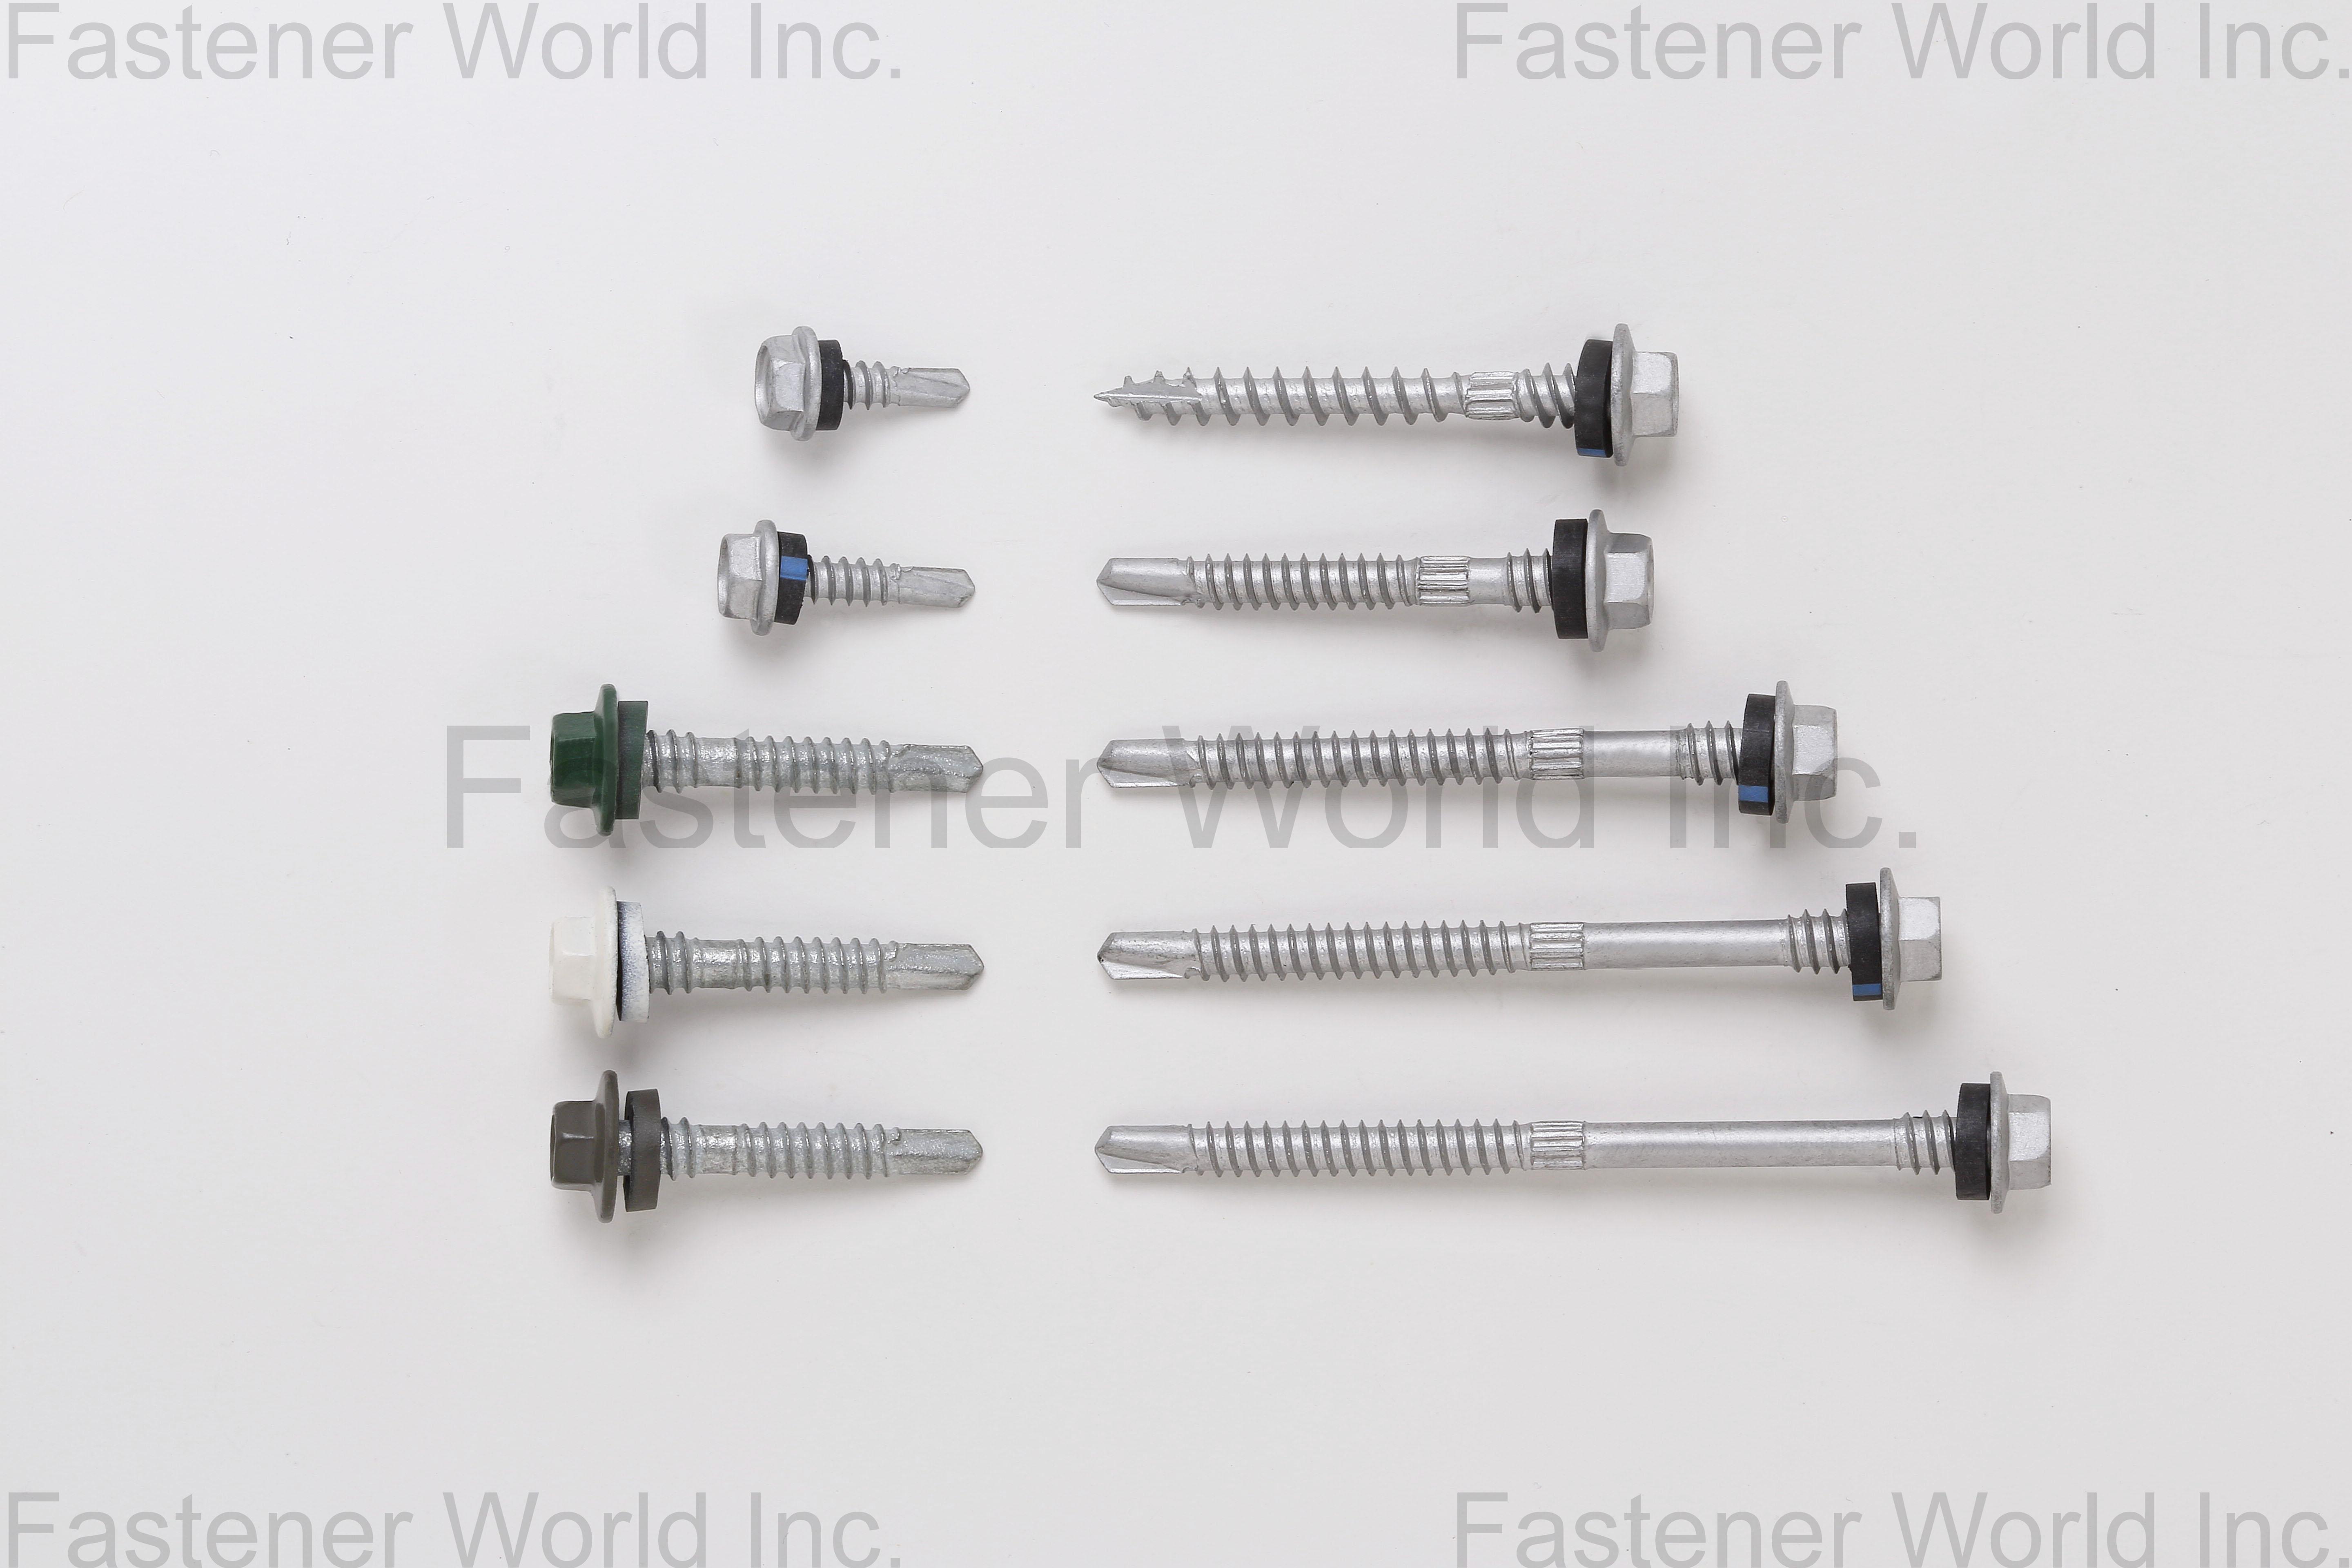 WILLIAM SPECIALTY INDUSTRY CO., LTD. , Flang Roofing Screw with EPDM Washer , Roofing Screws